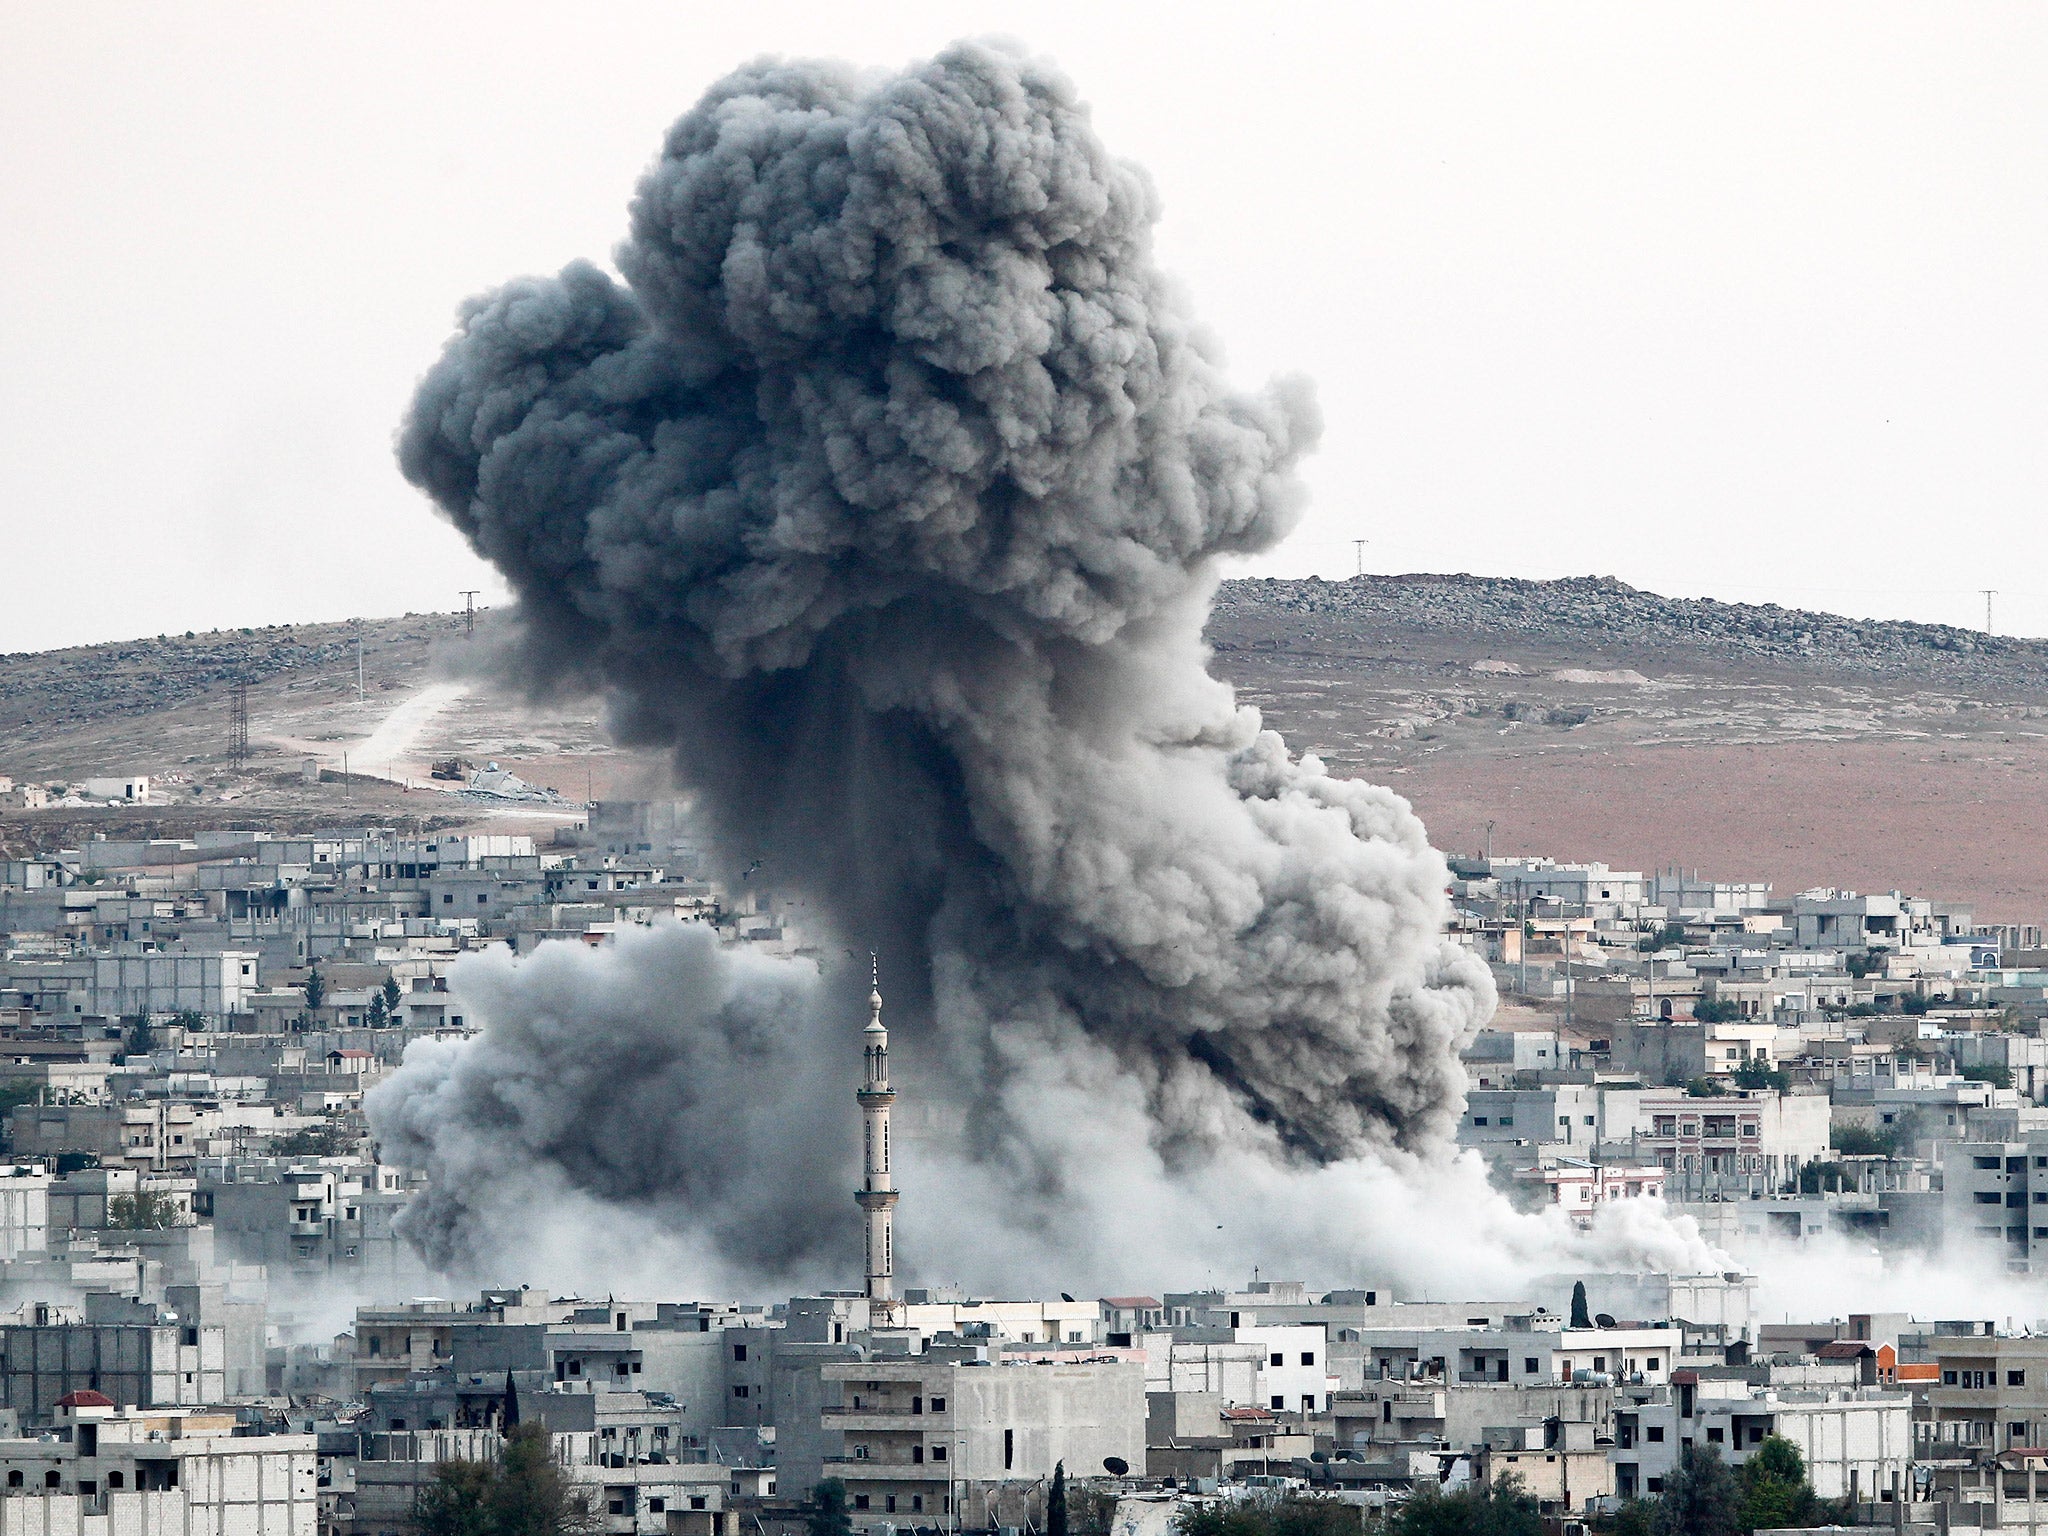 Heavy smoke rises following an air strike by the US-led coalition in Kobani, Syria